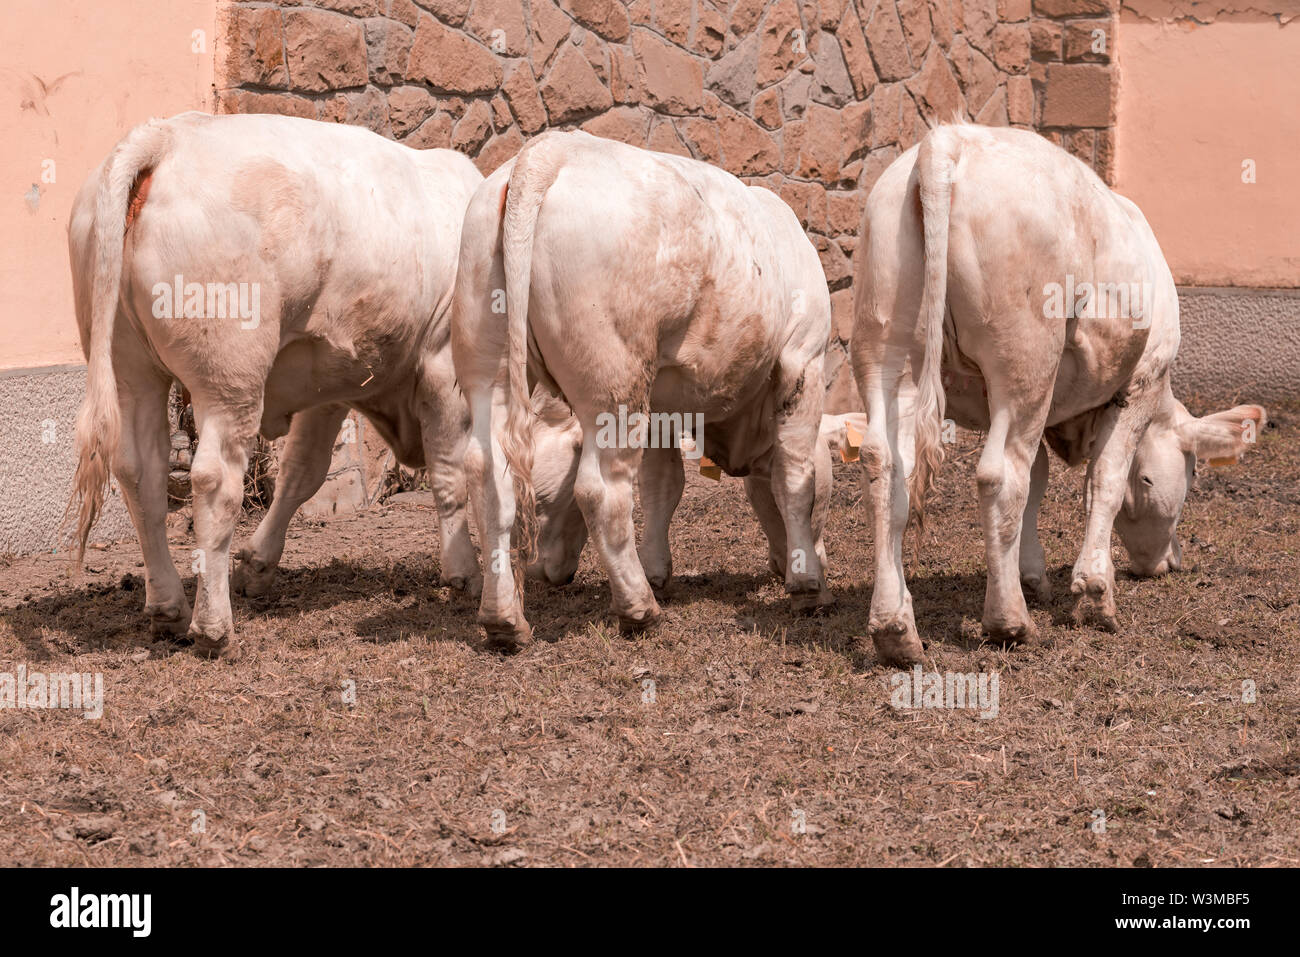 Blonde d'Aquitaine cattle cows on dairy farm, domestic animal husbandry Stock Photo